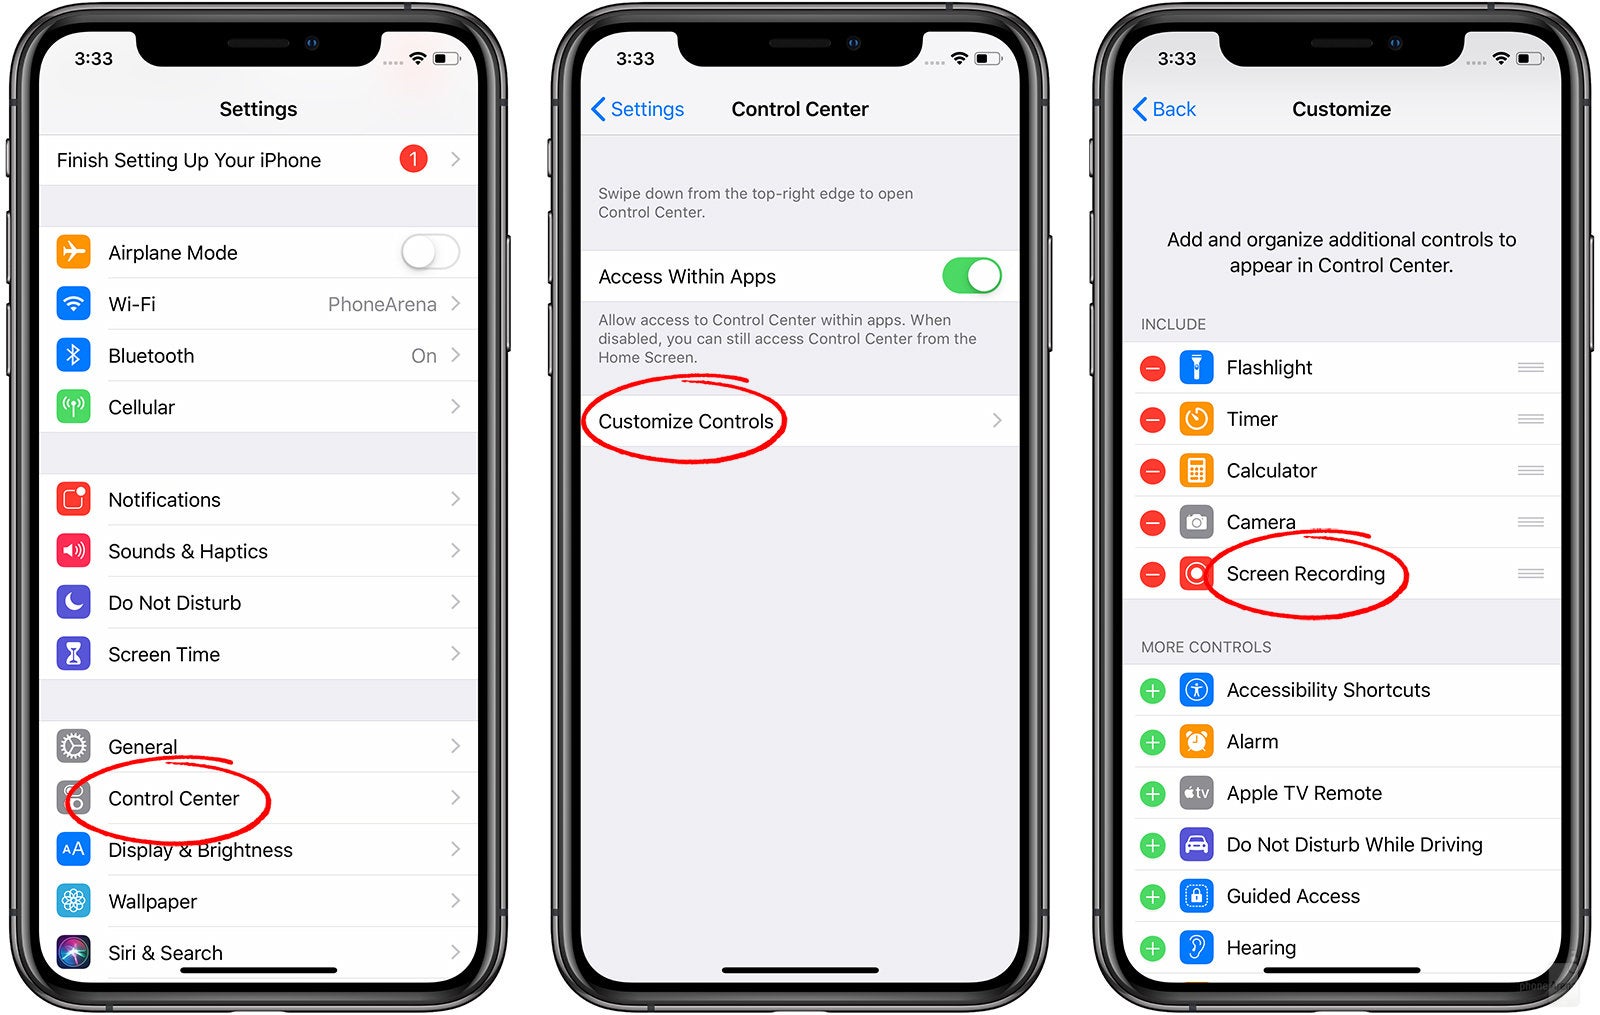 How to record your iPhone screen